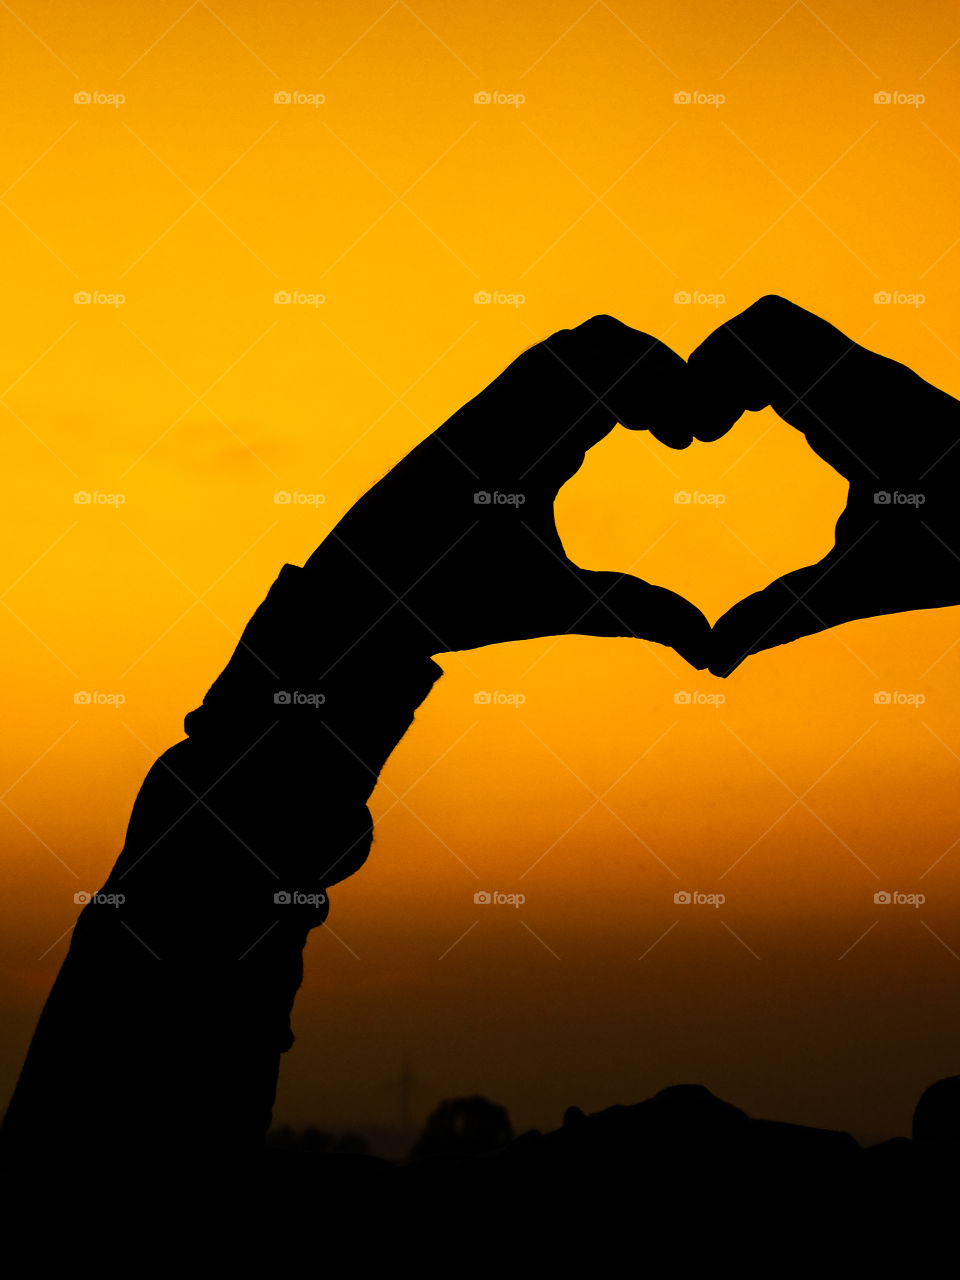 Silhouette image or wallpaper - Love wallpaper or heart shaped hand posture with beautiful after sunset golden light background.I love 2019 very much.